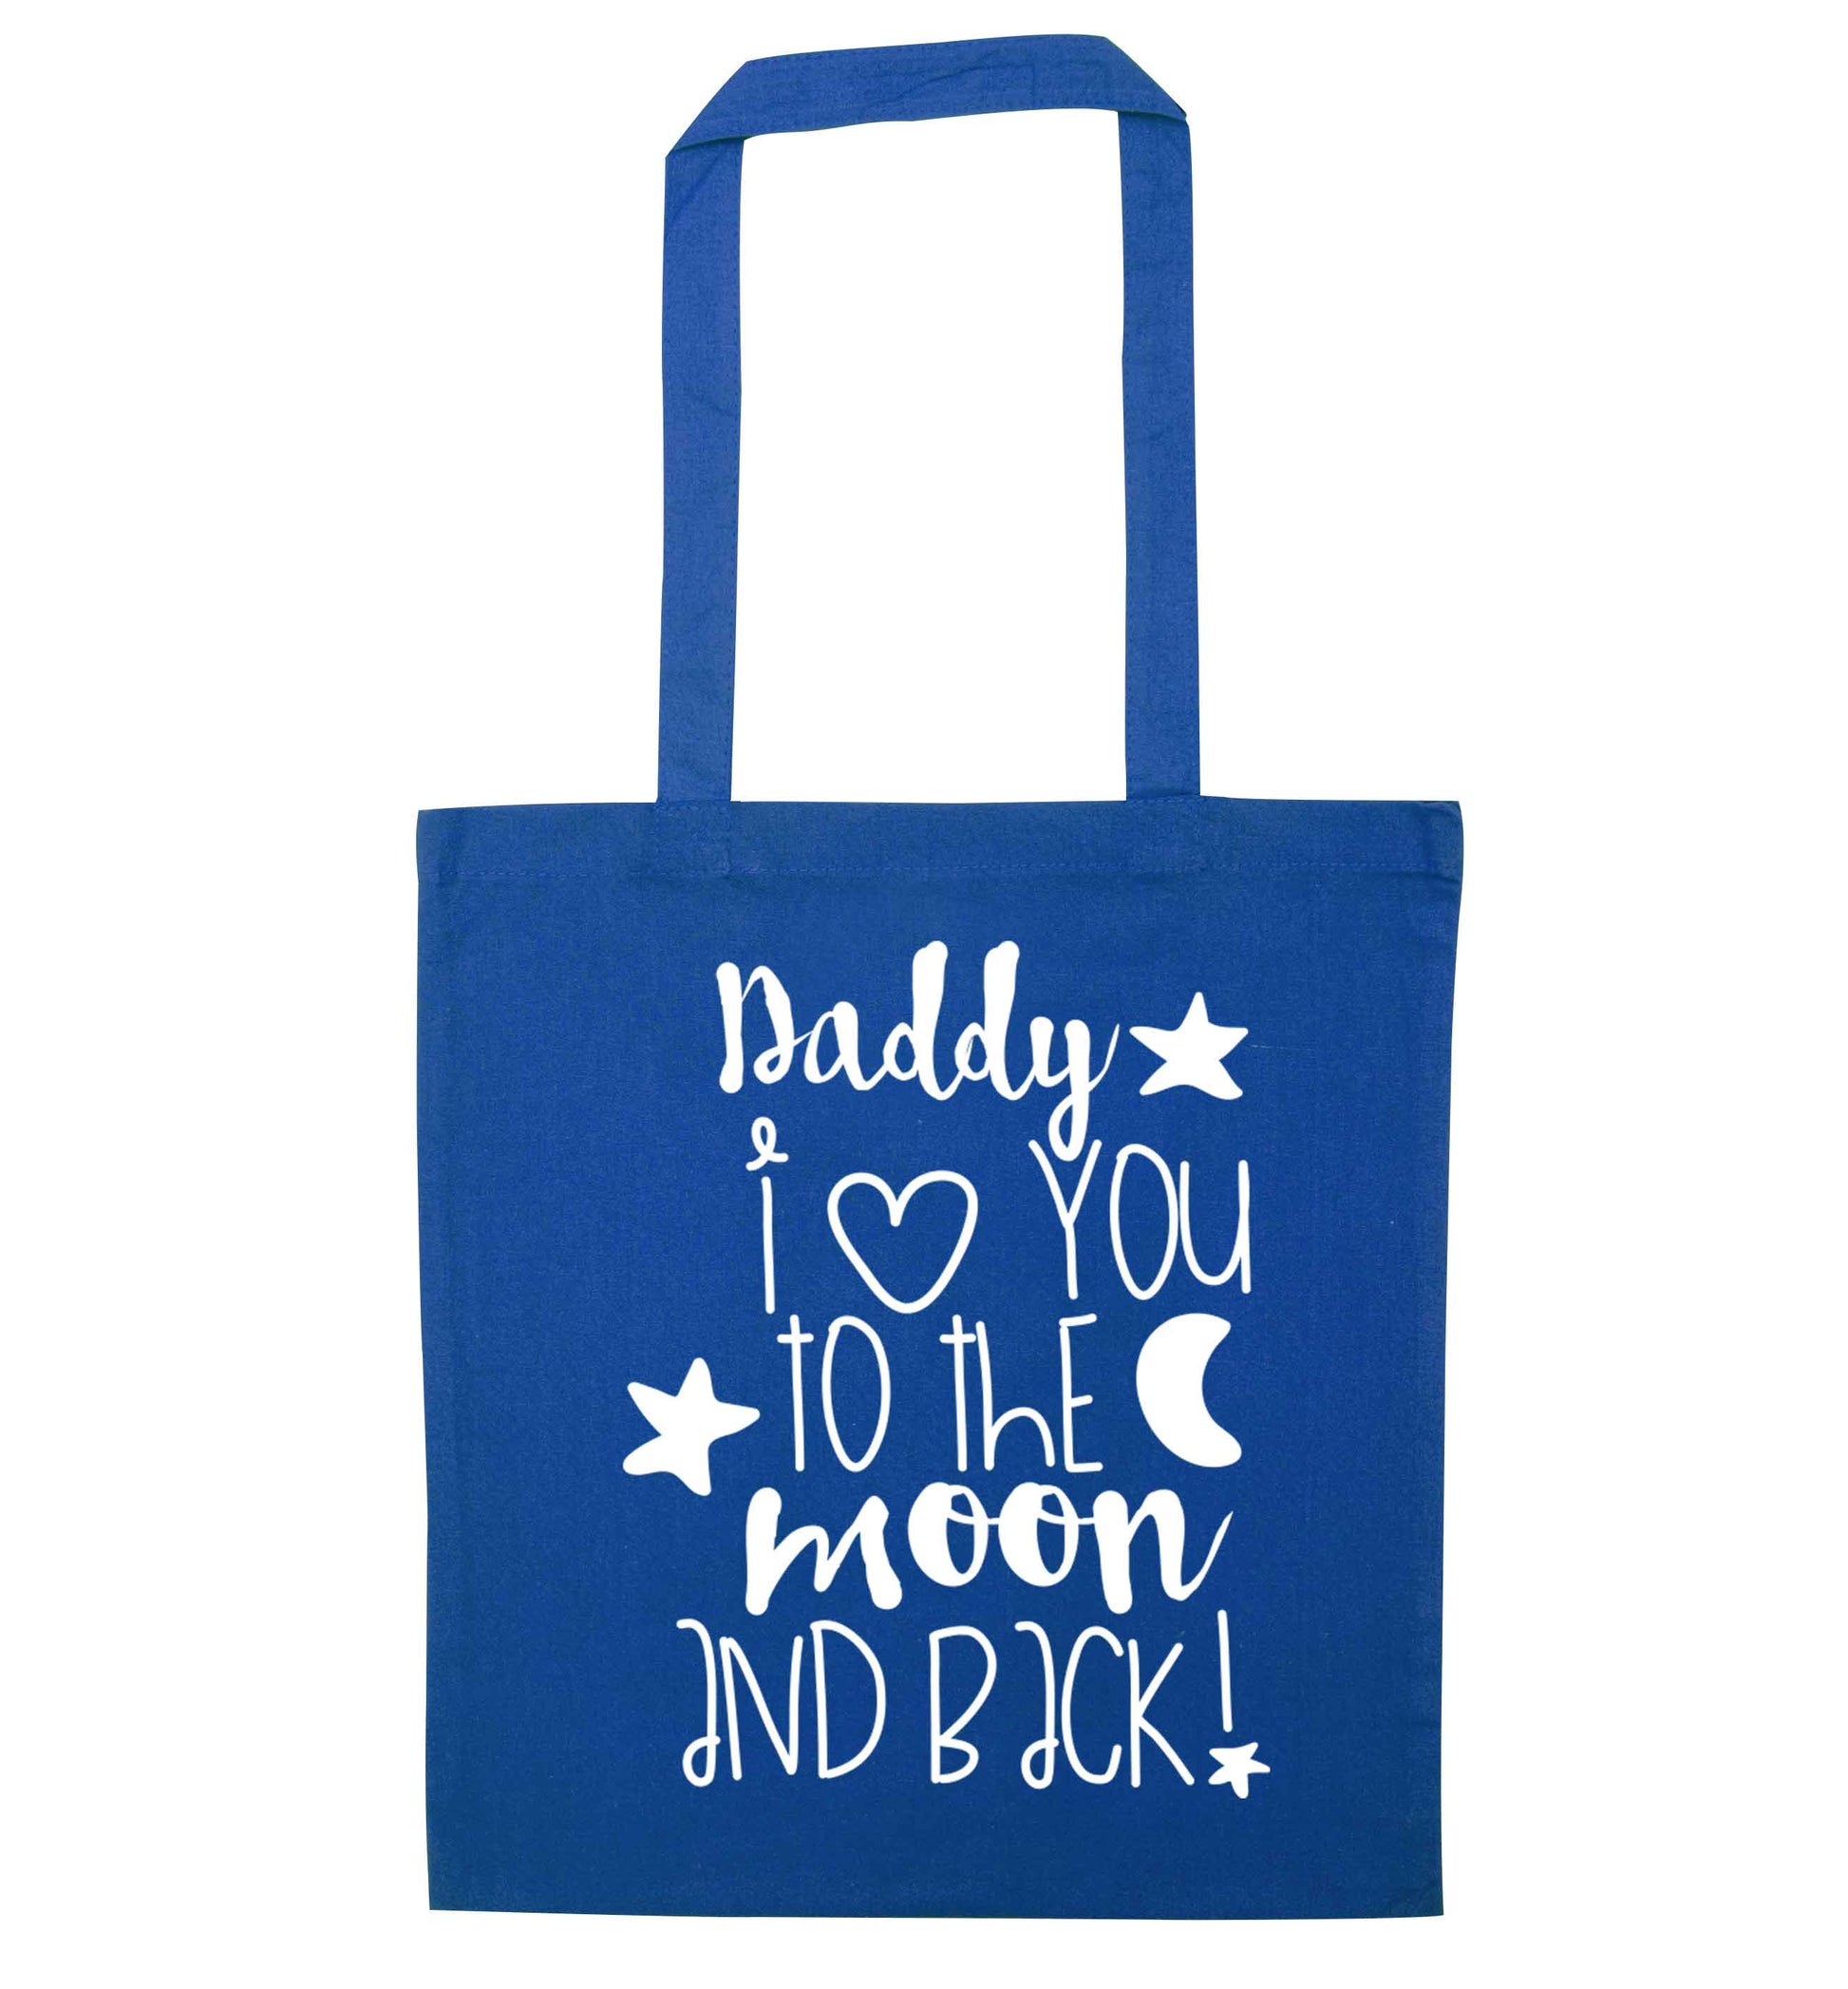 Daddy I love you to the moon and back blue tote bag